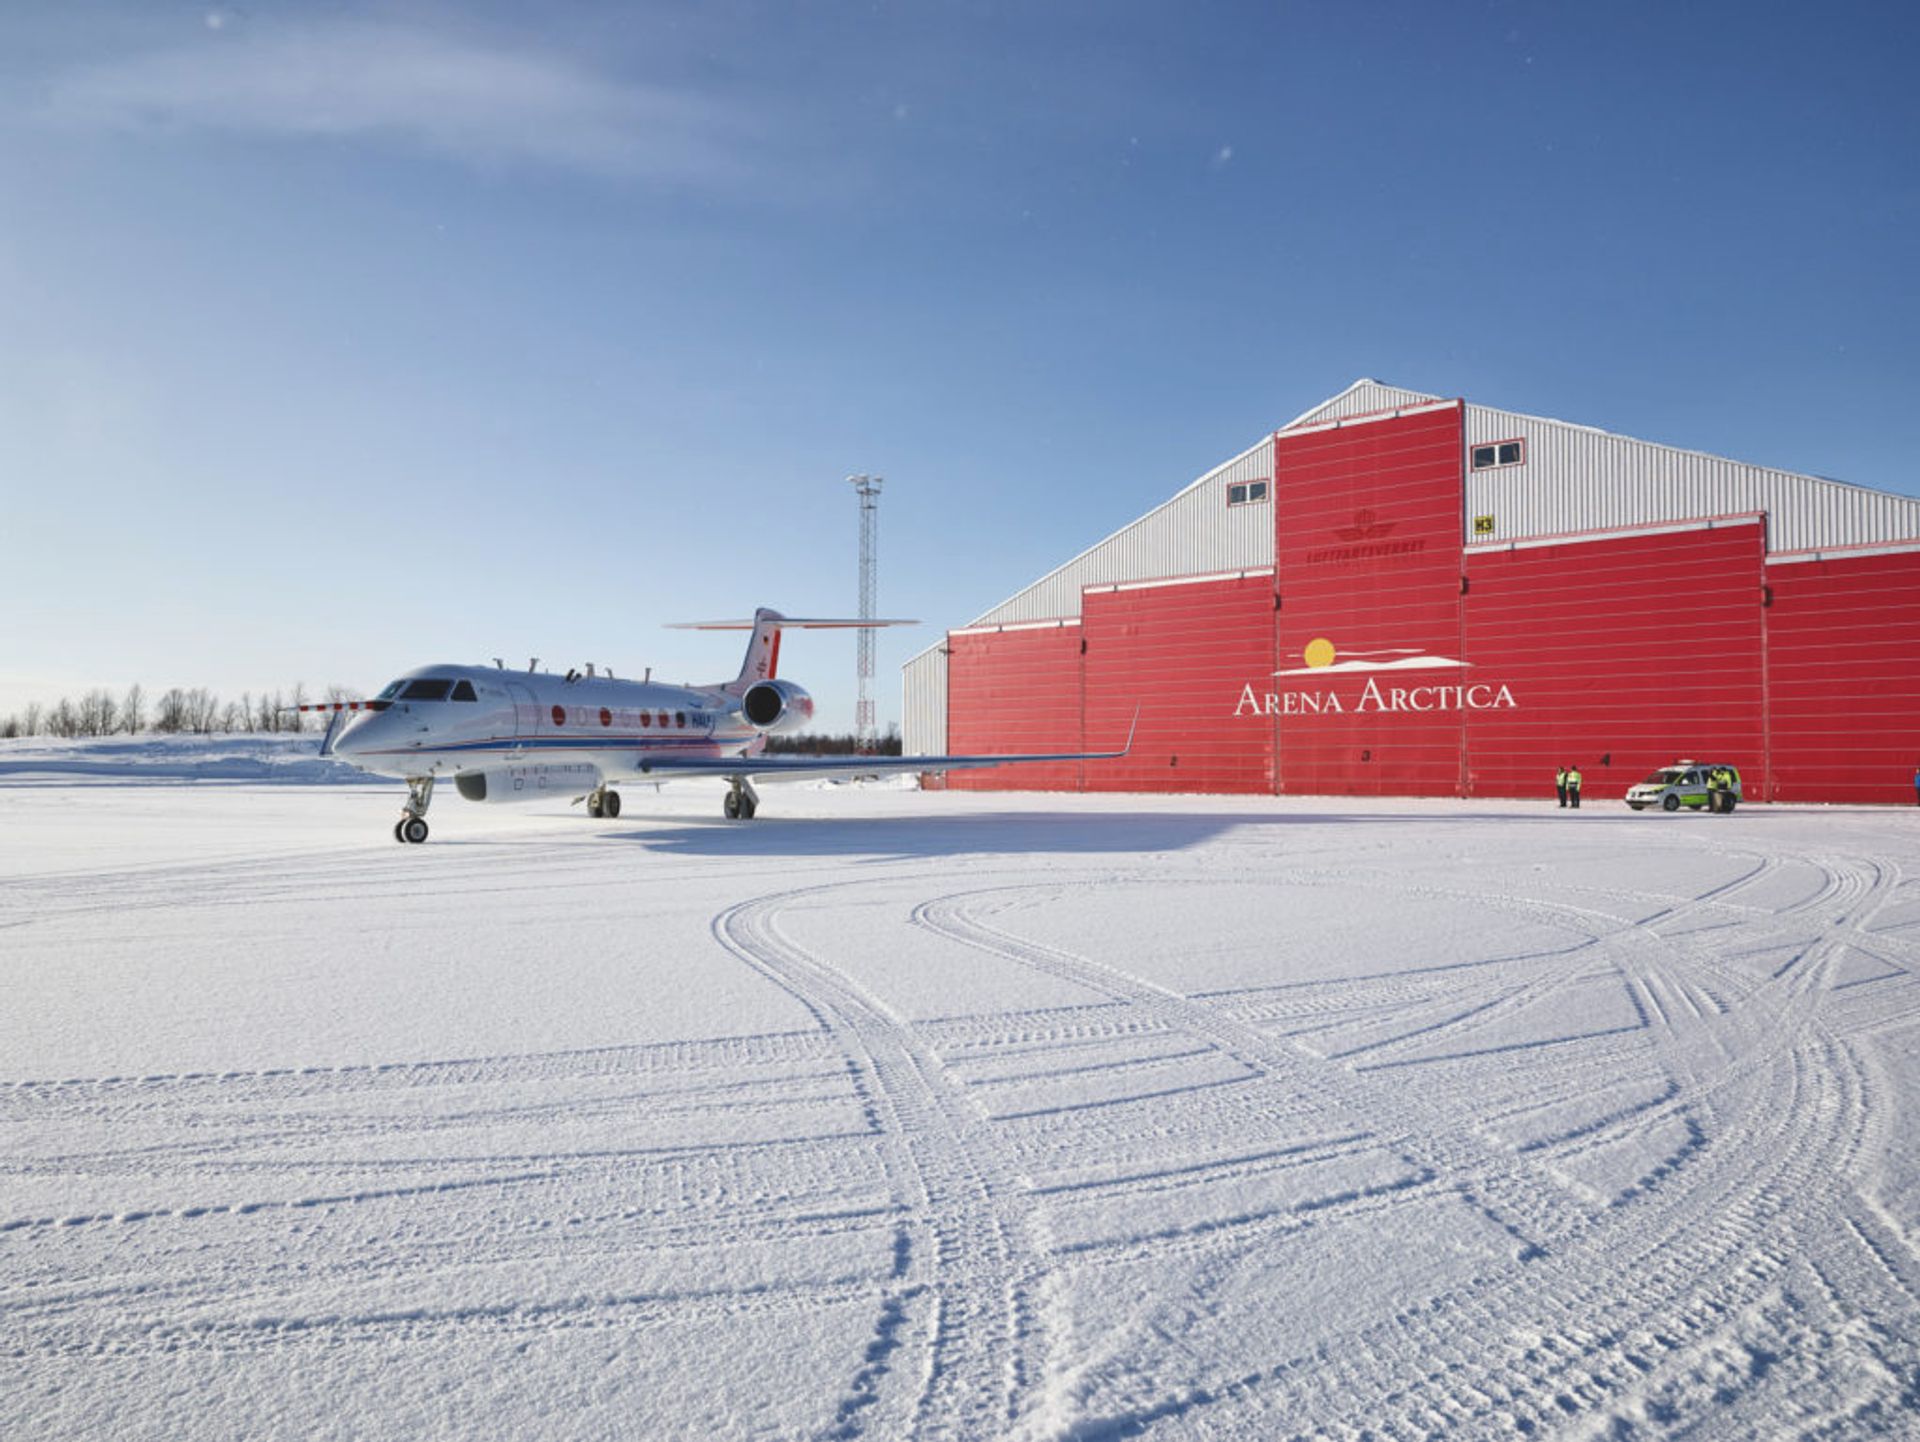 An aeorplane stands still at a snowy airport.